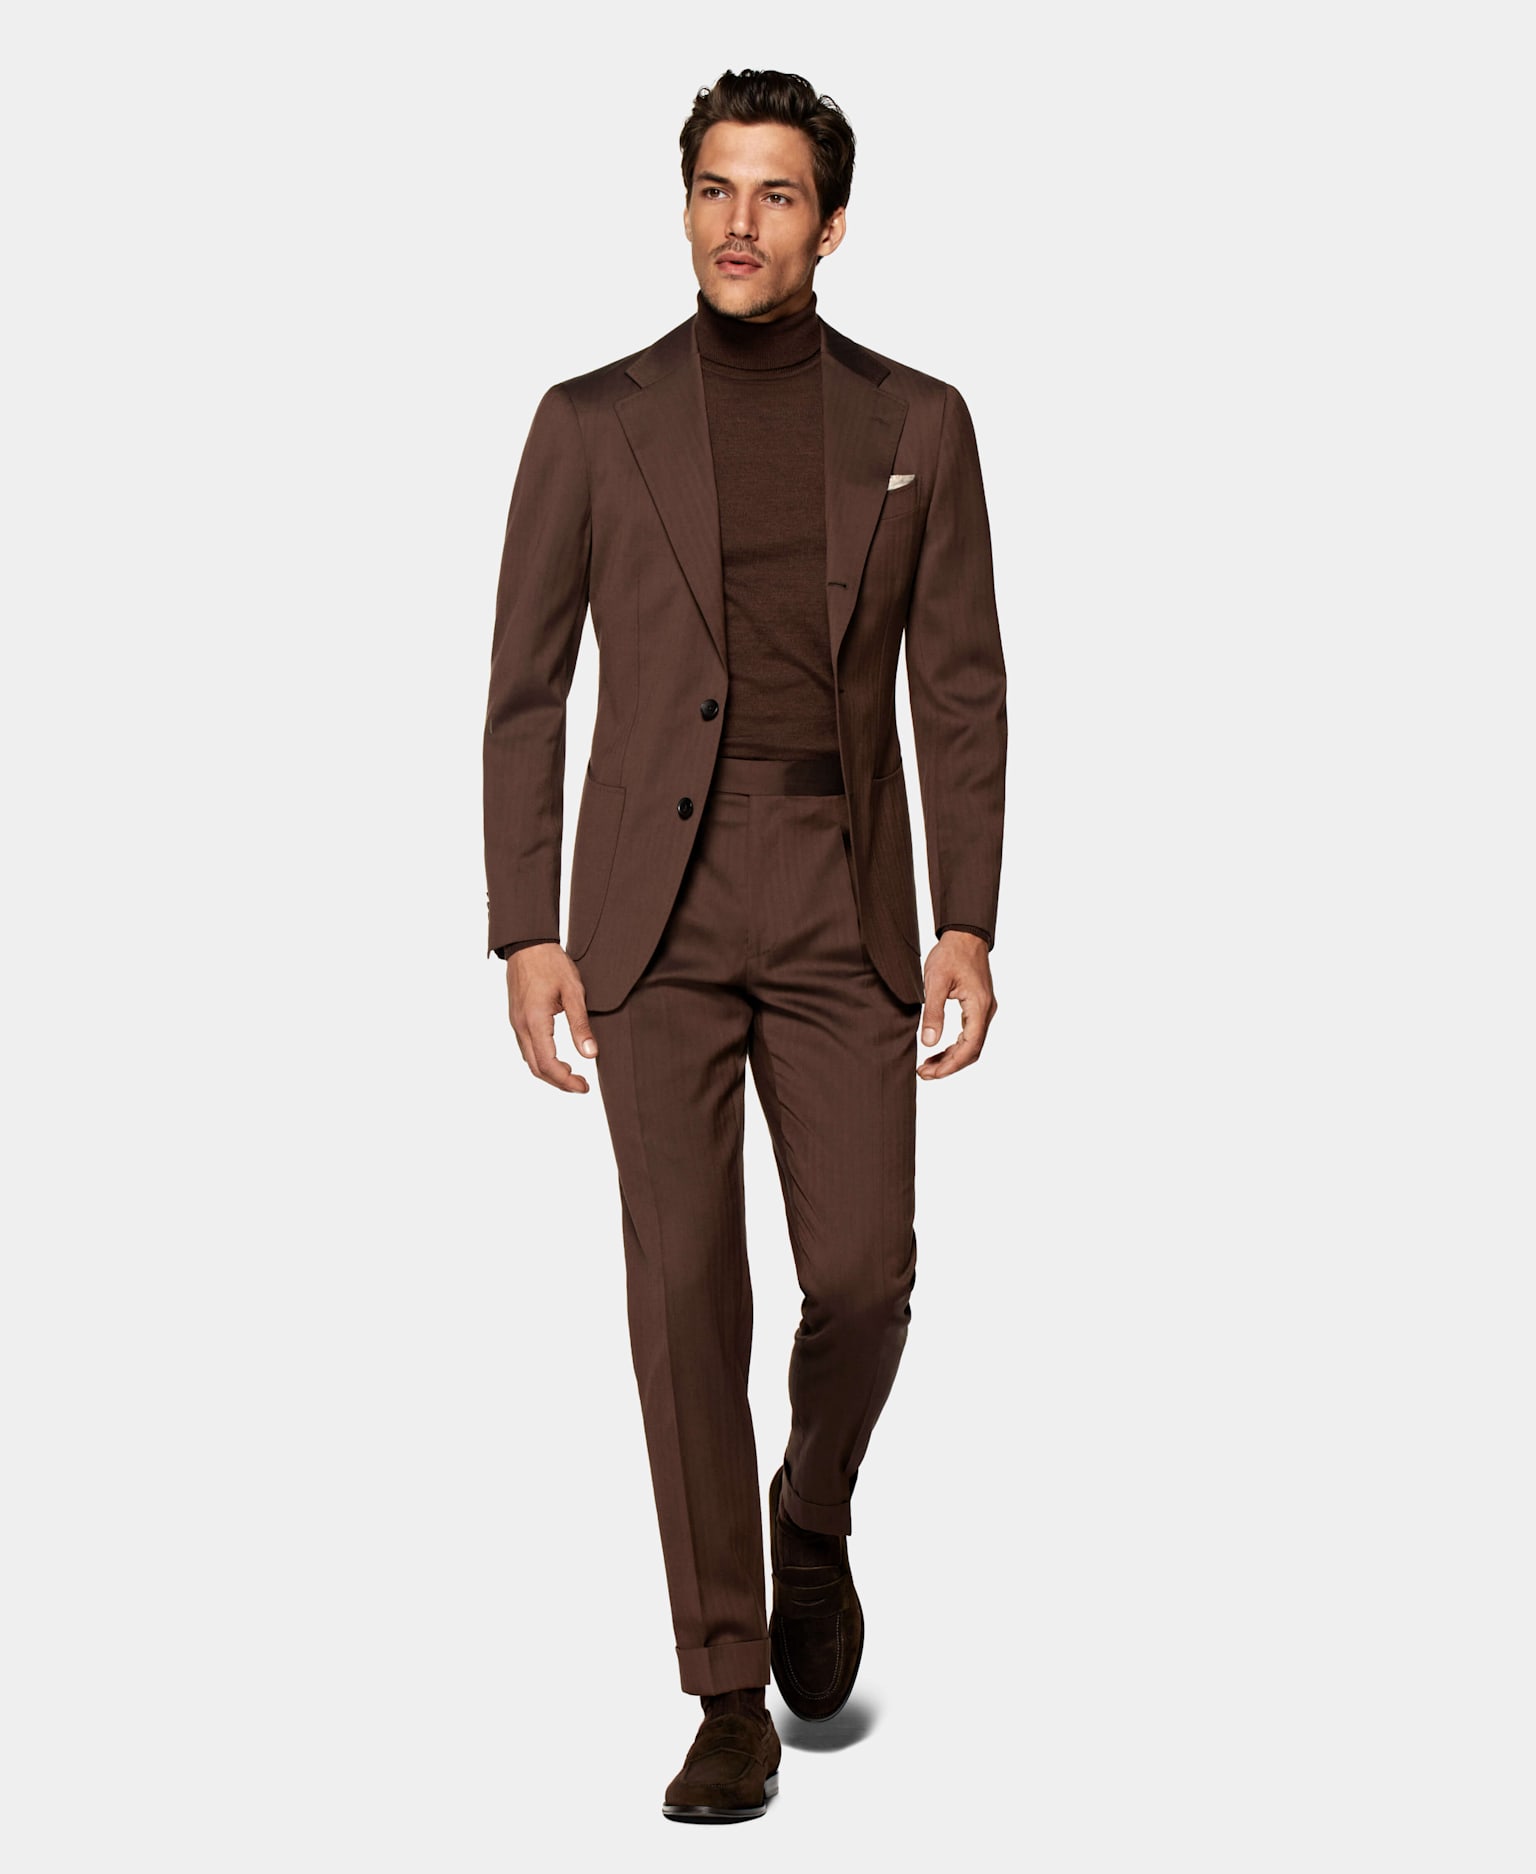 Make a statement in this brown havana suit, paired up with a silk turtleneck.